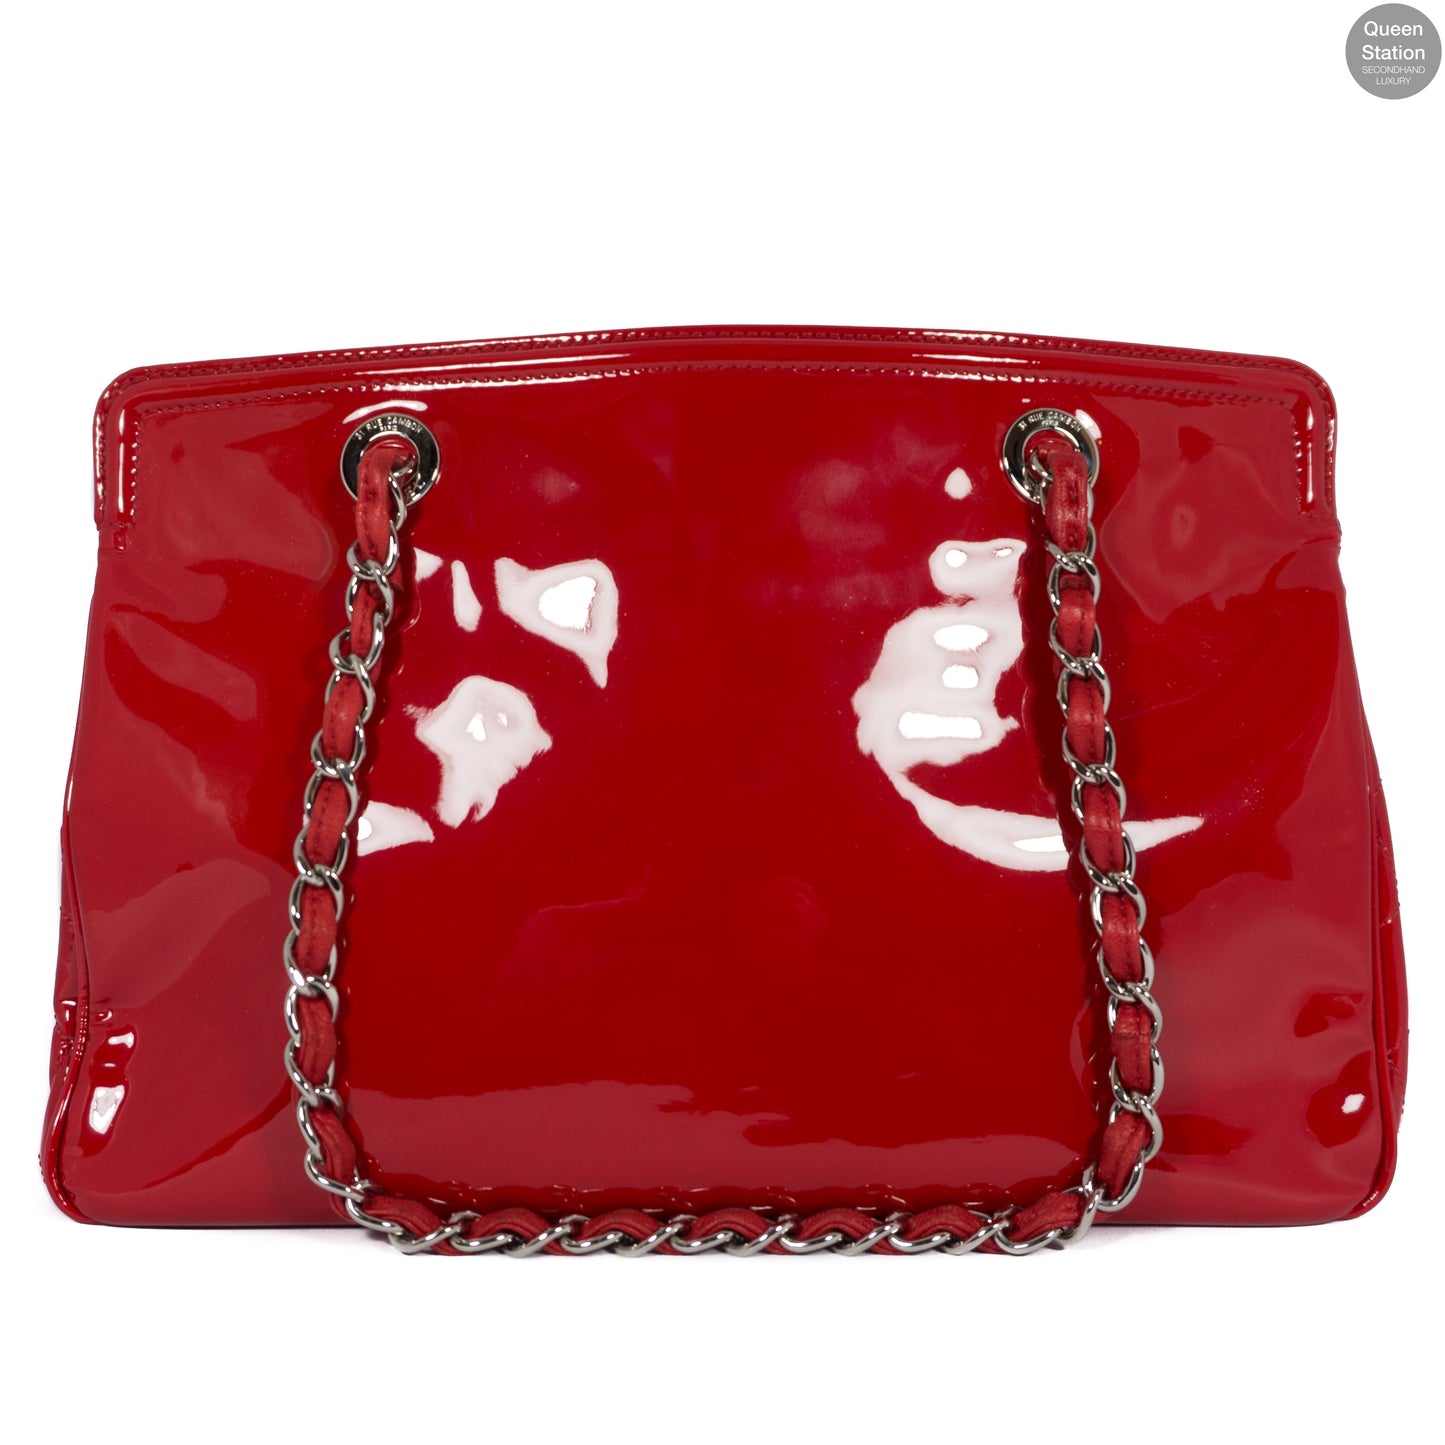 Chanel Red Patent Leather Lipstick Tote